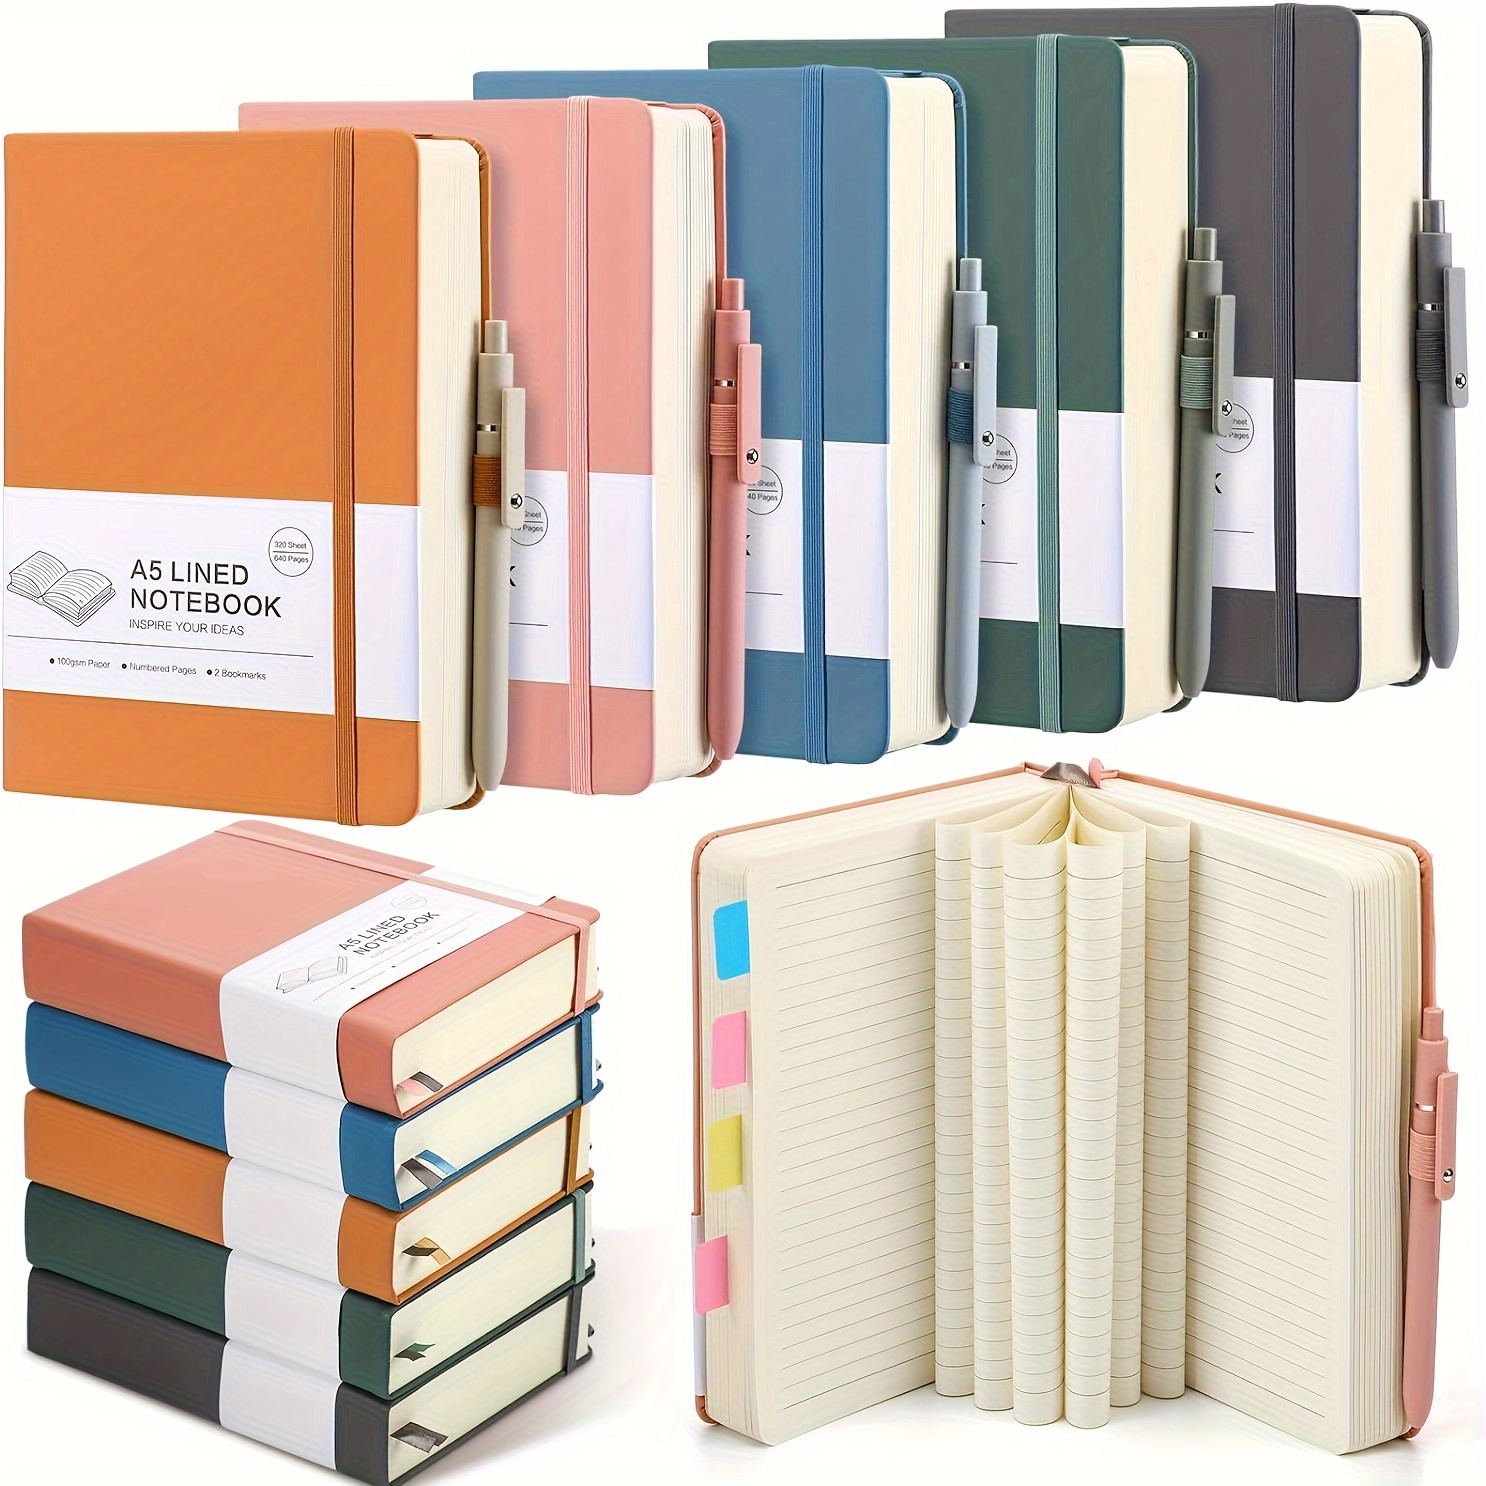 

10 Set 640 Pages Thick Leather Journal Notebook With Pen, A5 Thick Lined Journal Notebook, Multicolor For Writing, 320 Sheets Diary Notebook For School Office Home Travel